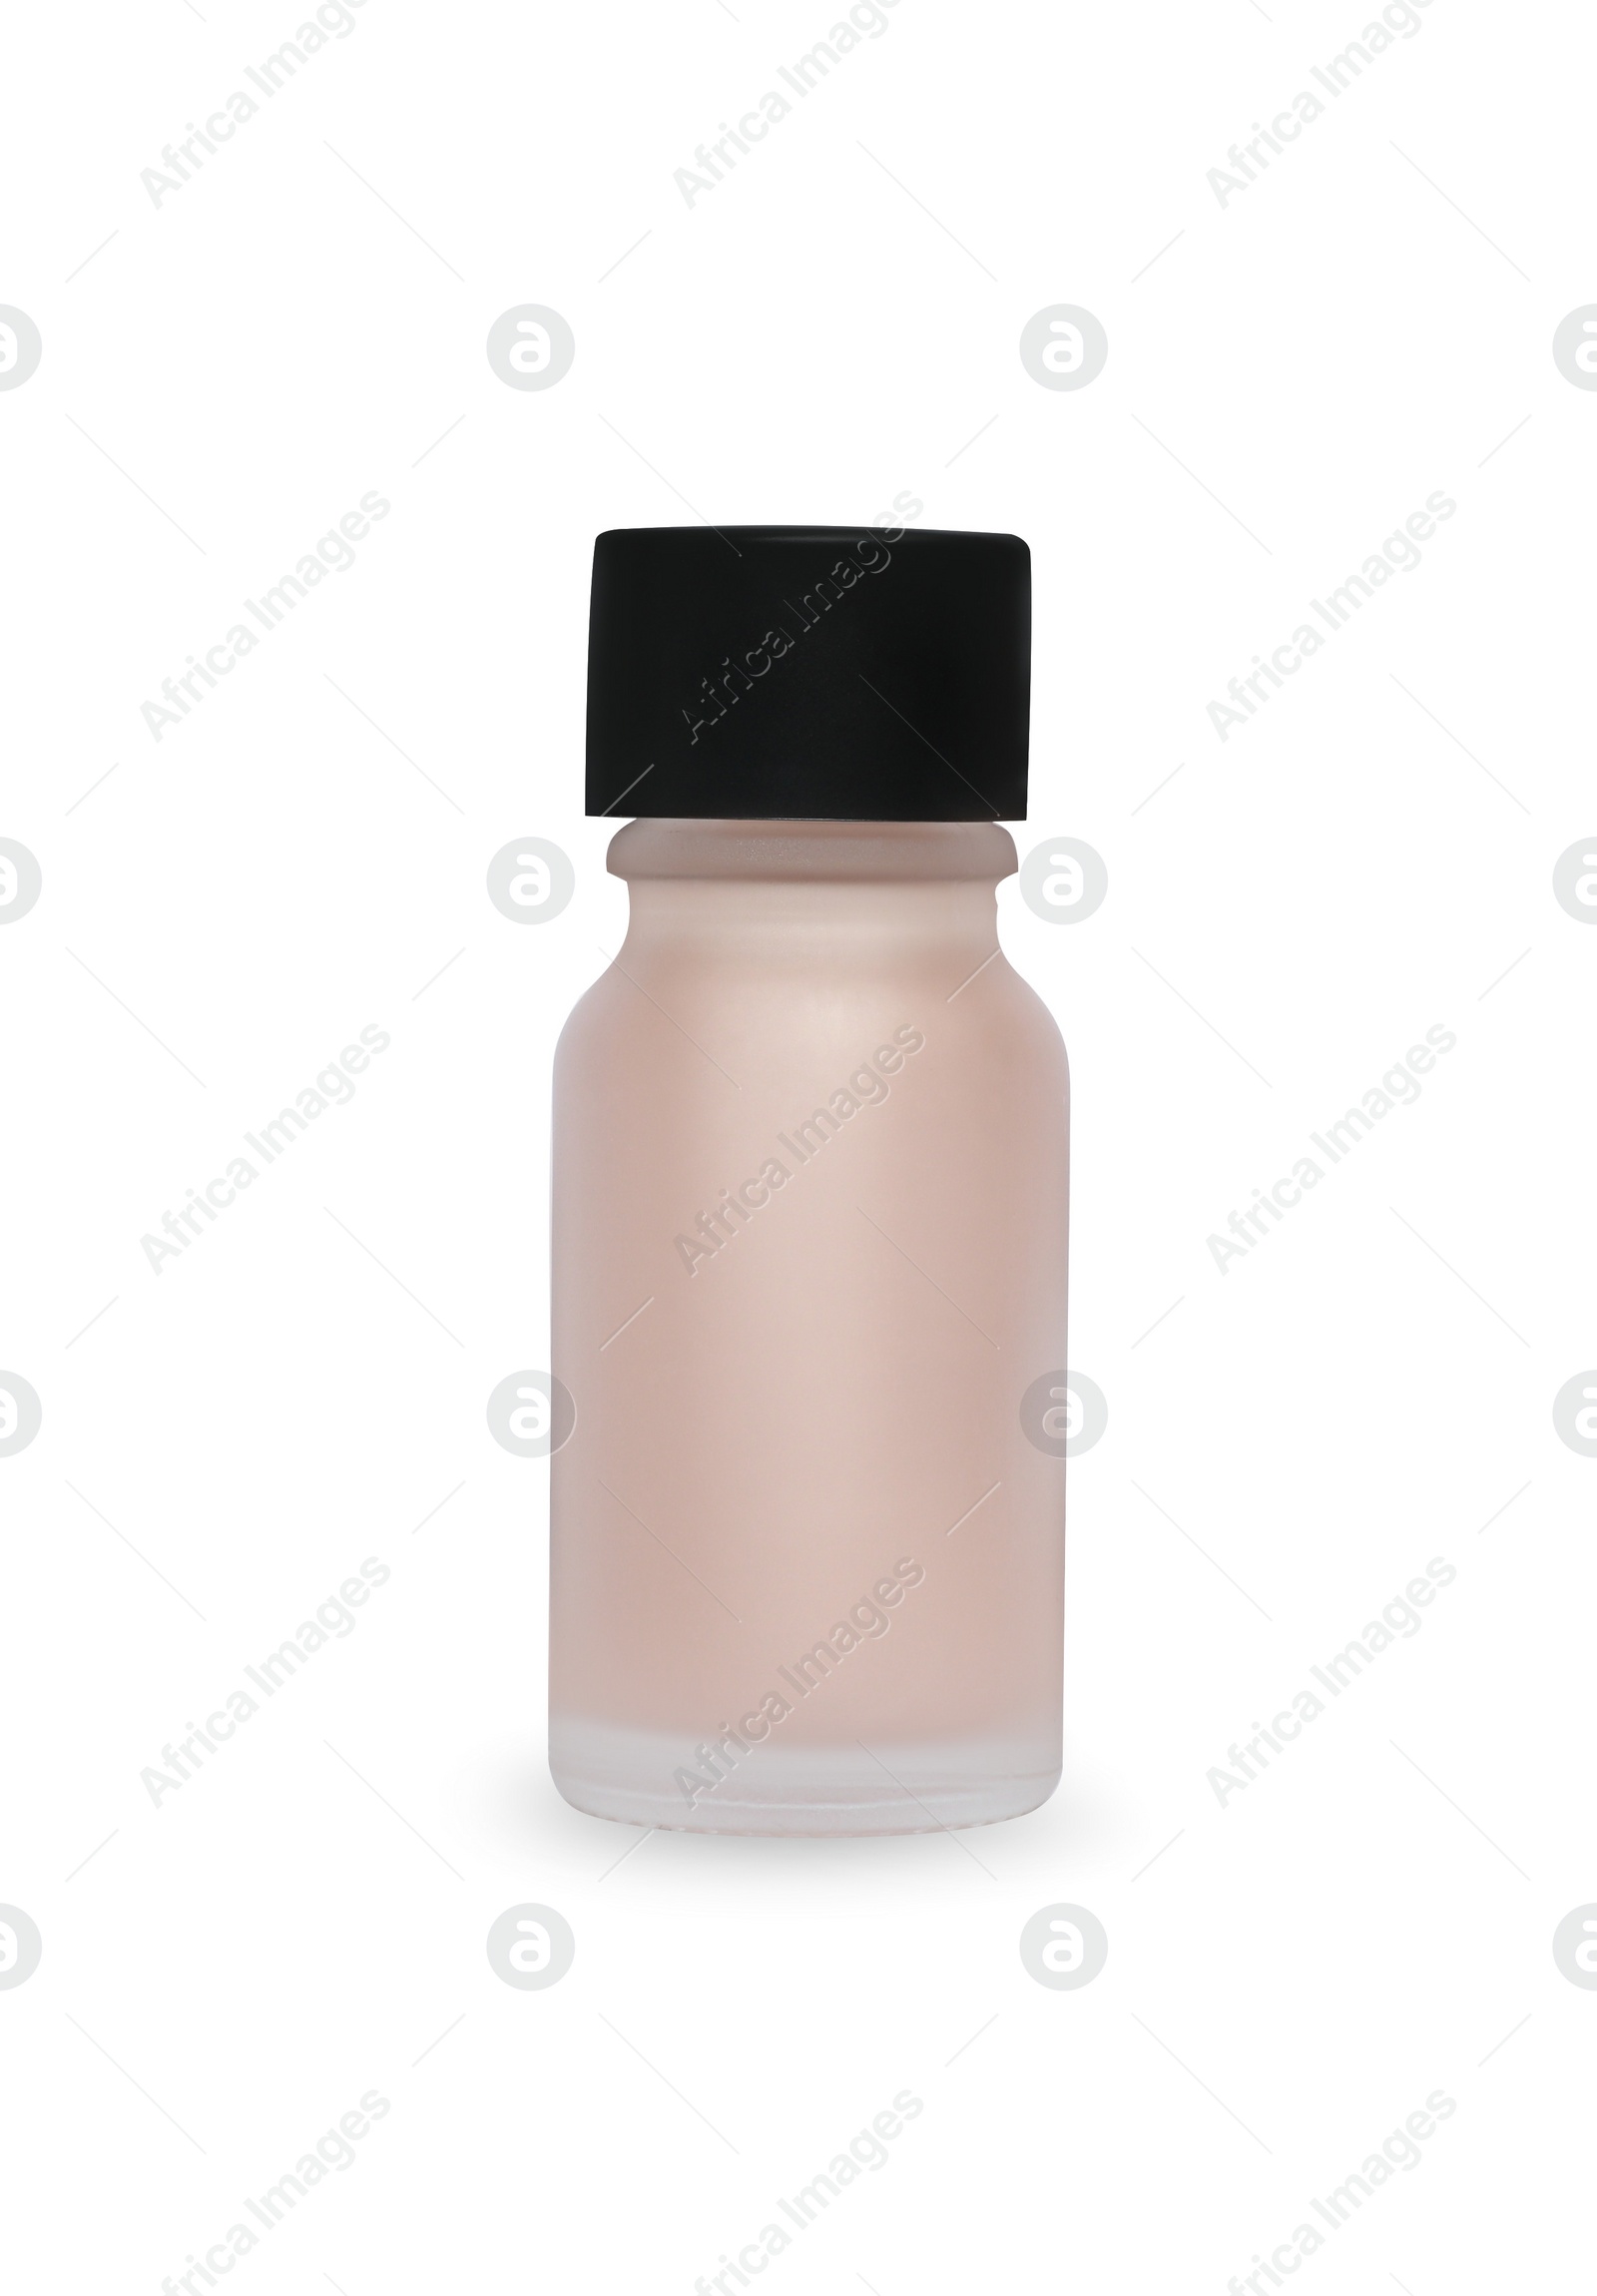 Photo of One bottle of decorative cosmetic product isolated on white